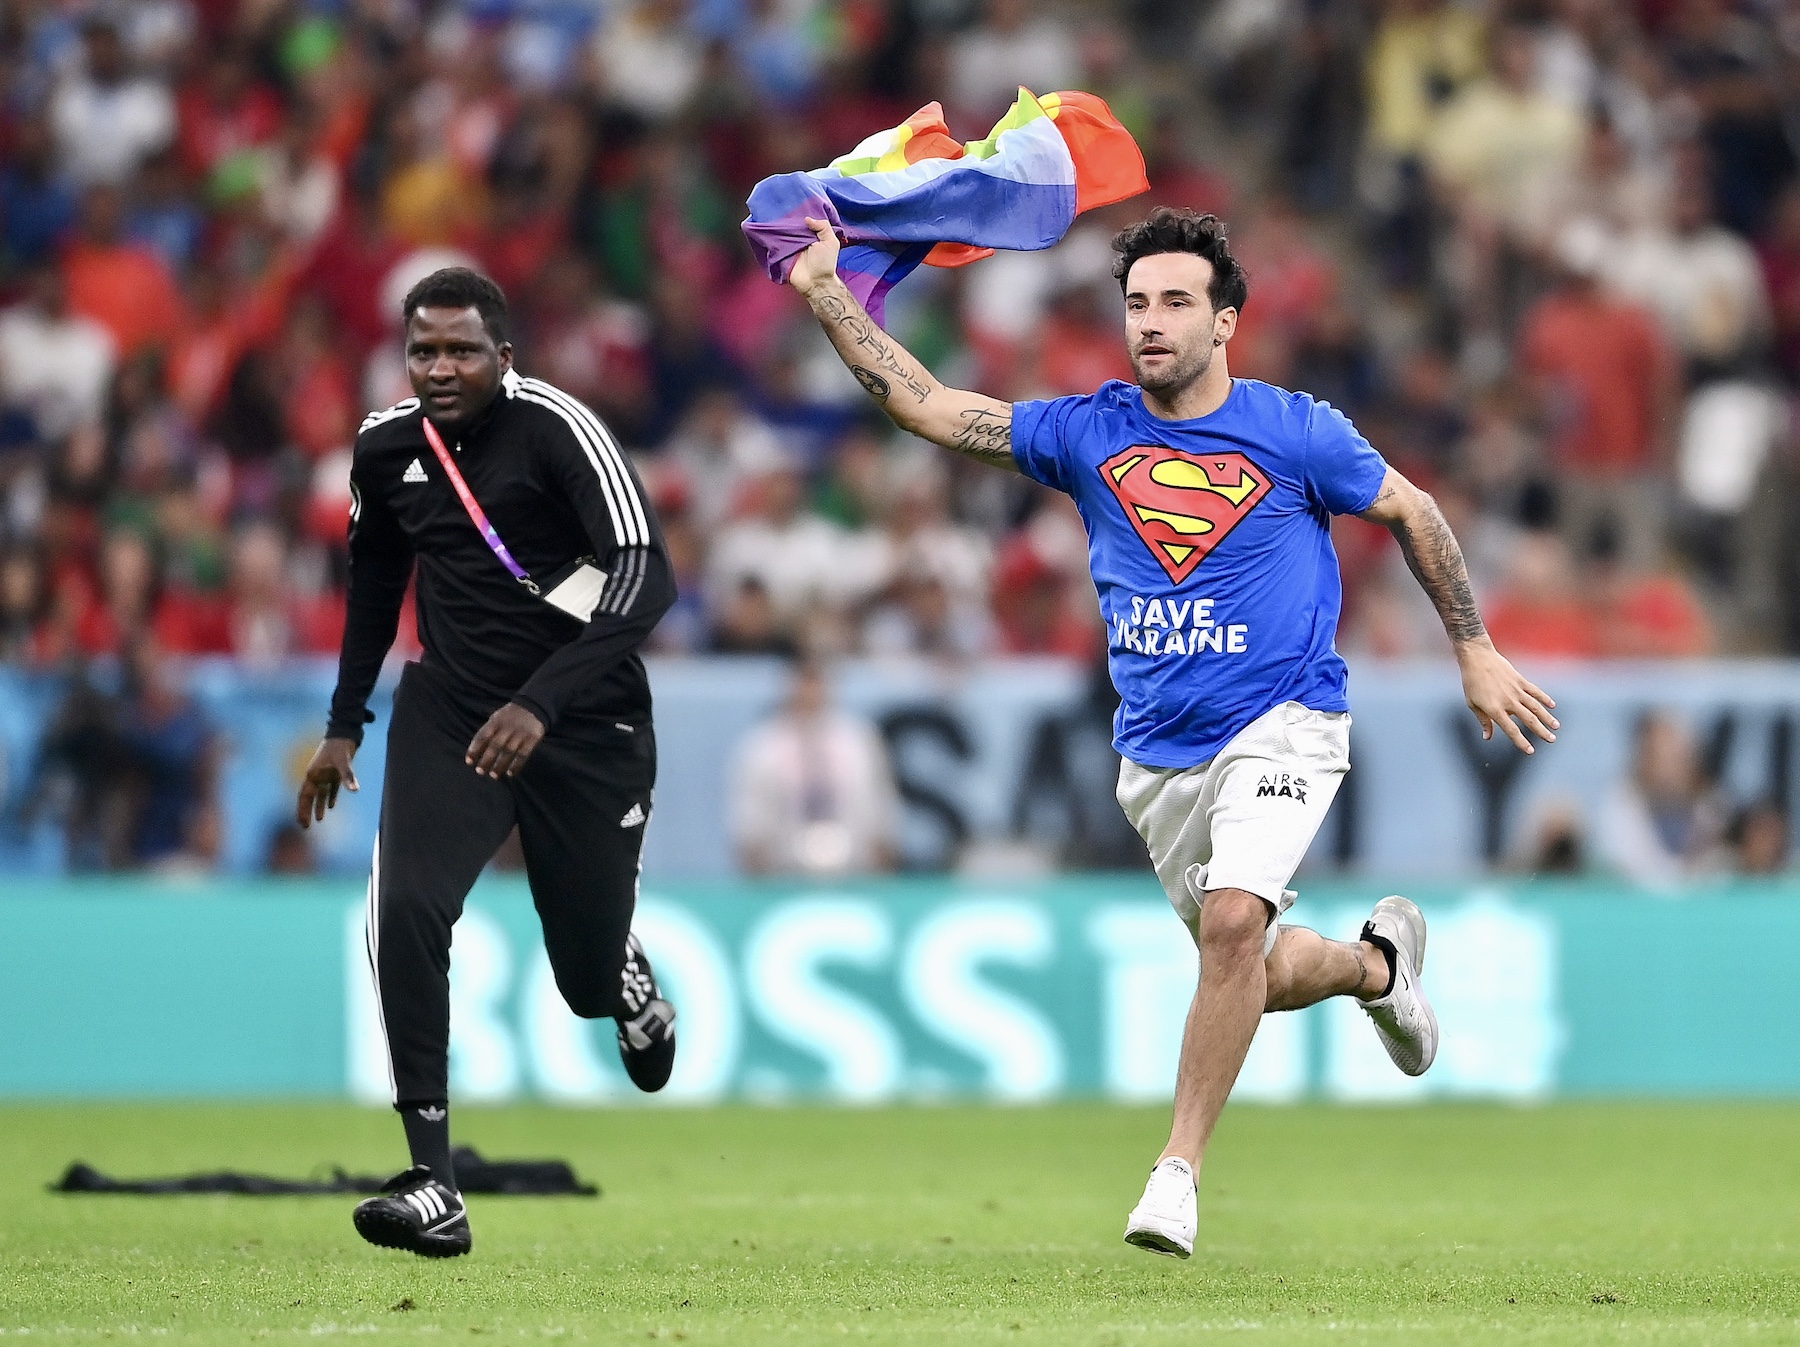 This Italian Fan Invaded The Pitch At The World Cup In Support Of LGBTQ People, Iranian Women And Ukraine